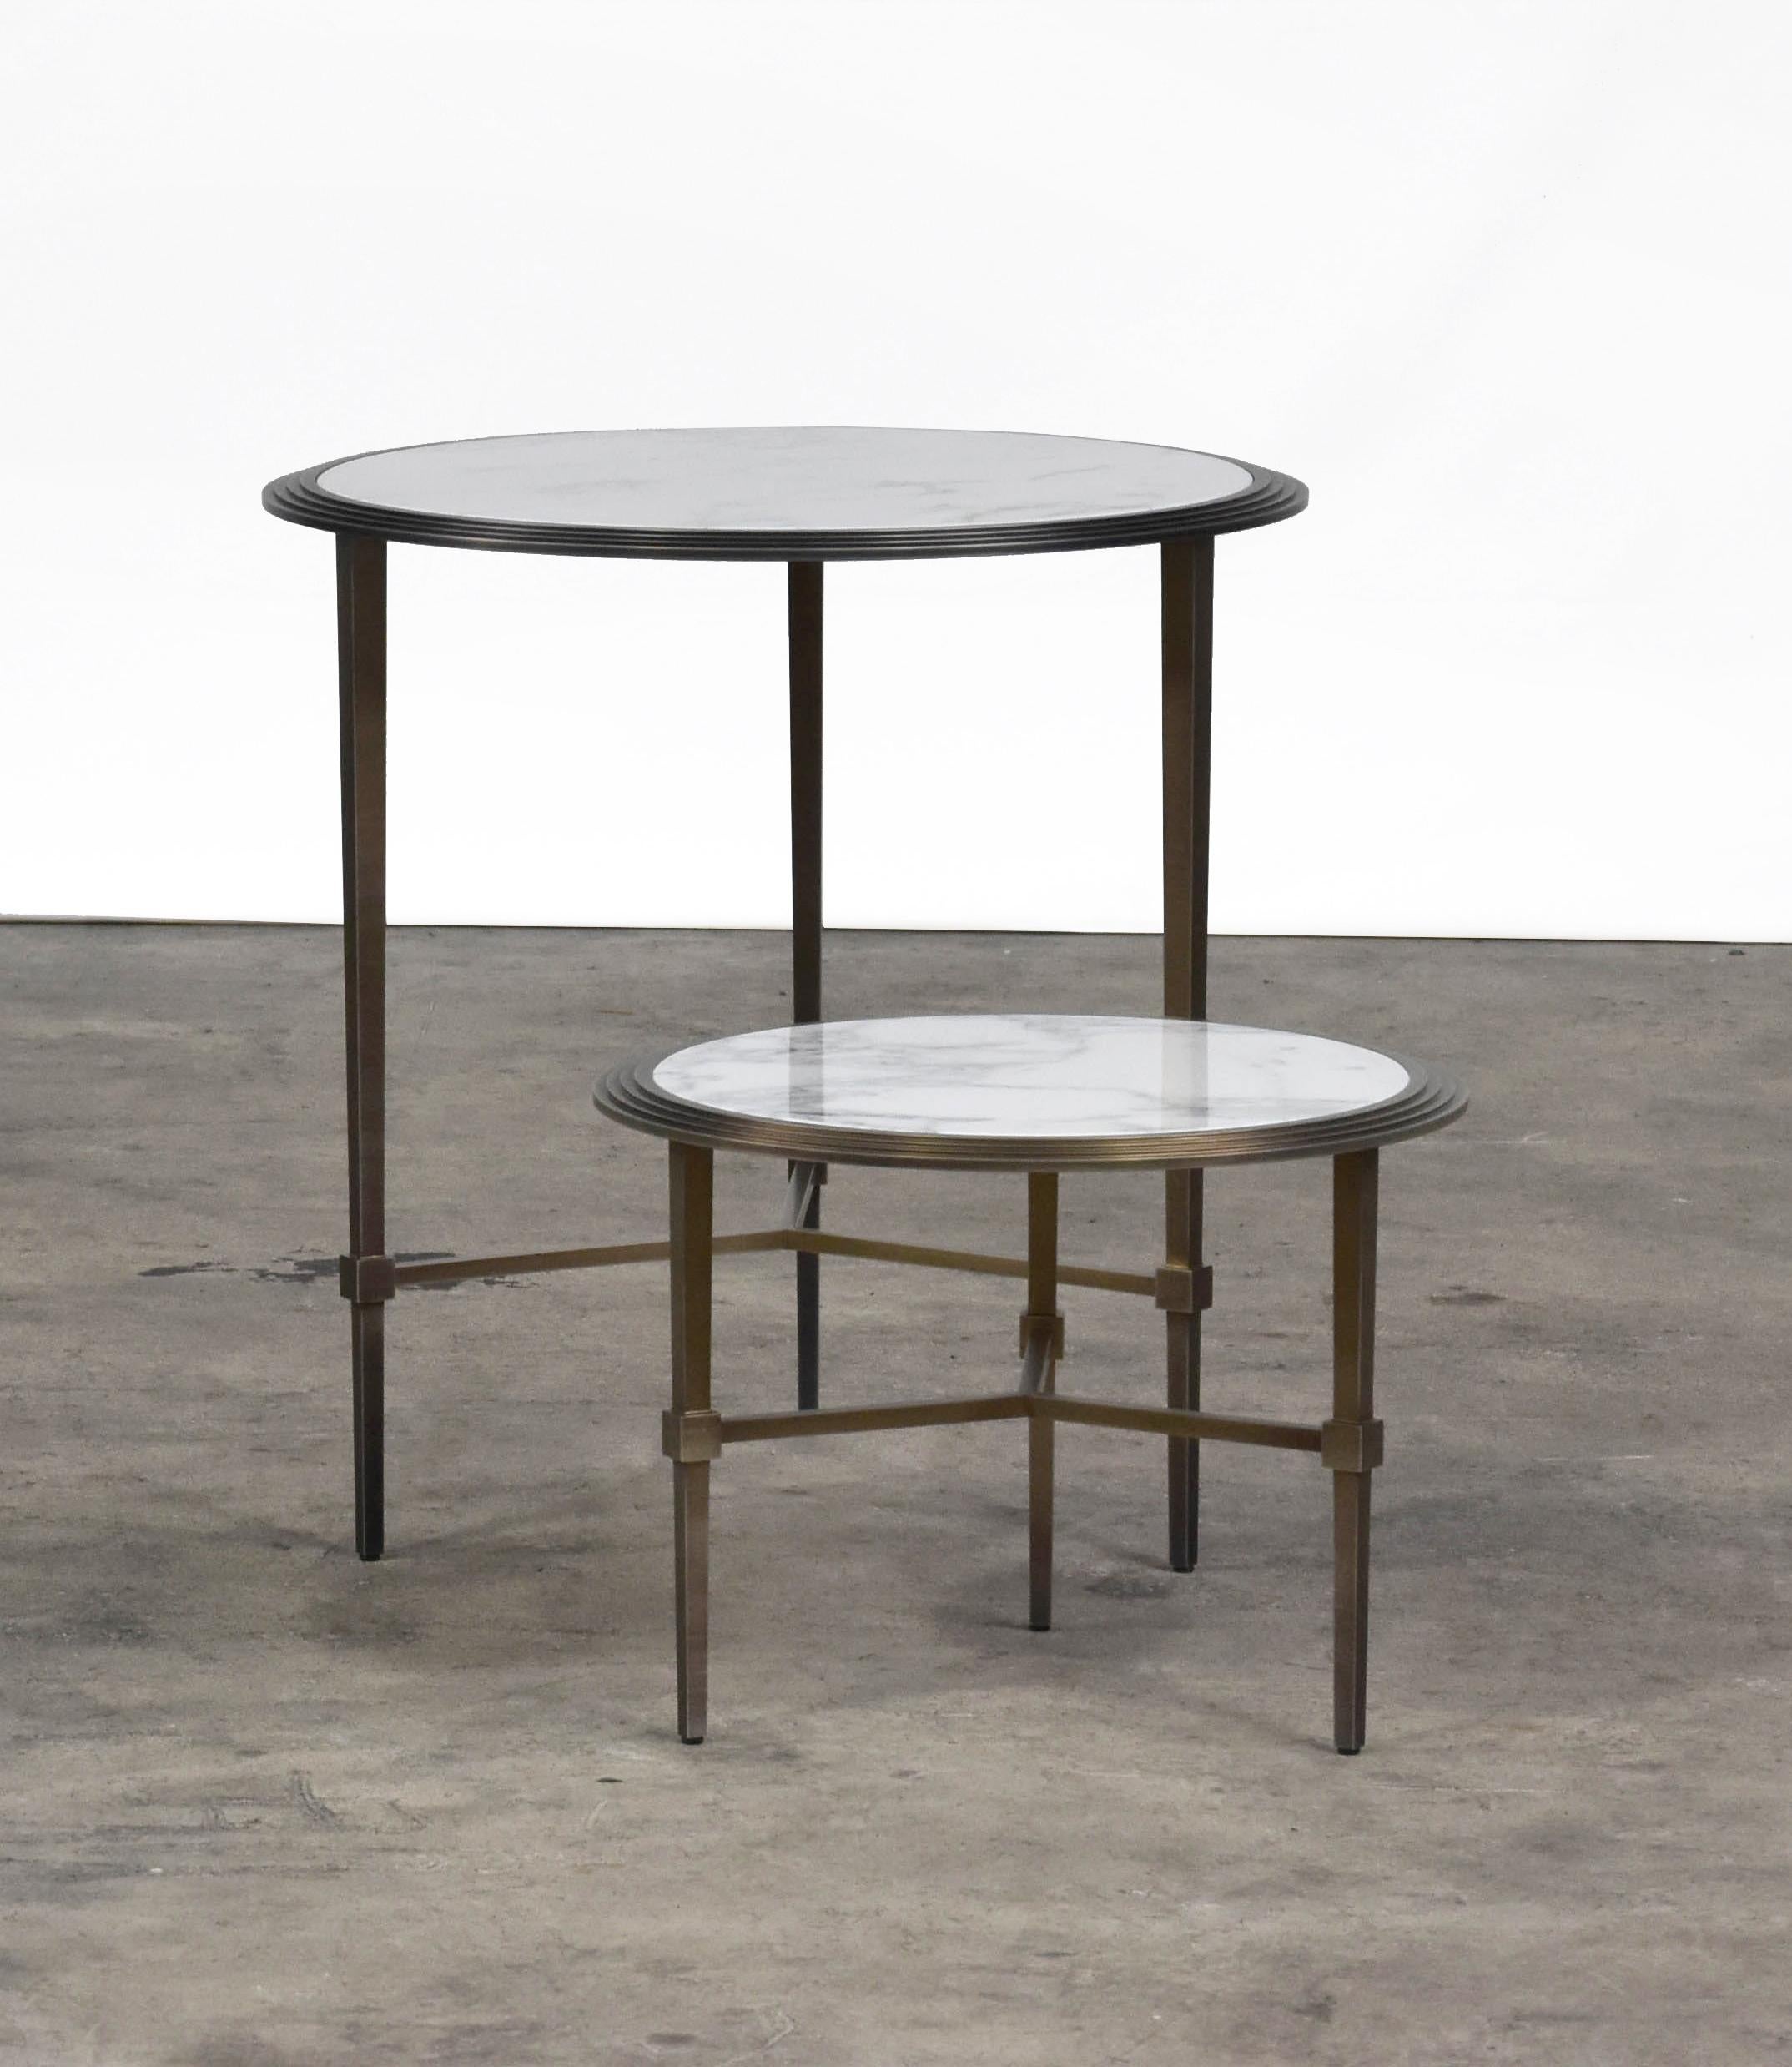 The Saturno coffee tables are a series of round coffee tables available in different heights and dimensions to create layered compositions. Base color is brushed bronze with Carrara marble top. Diameter combination of 14 and 20 inches.
  